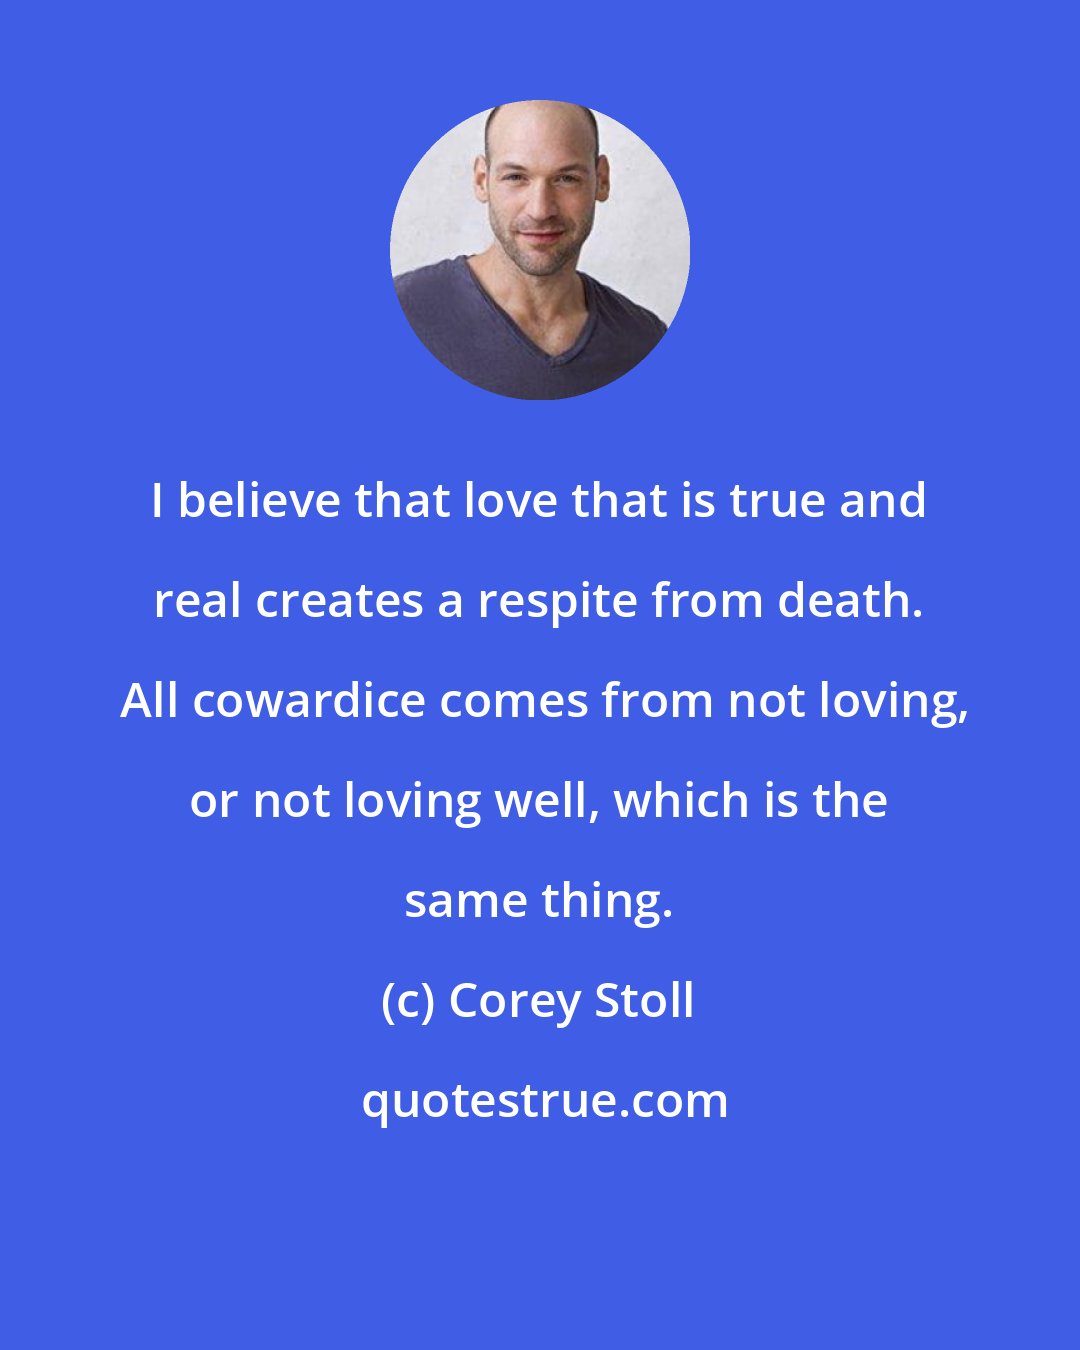 Corey Stoll: I believe that love that is true and real creates a respite from death.  All cowardice comes from not loving, or not loving well, which is the same thing.